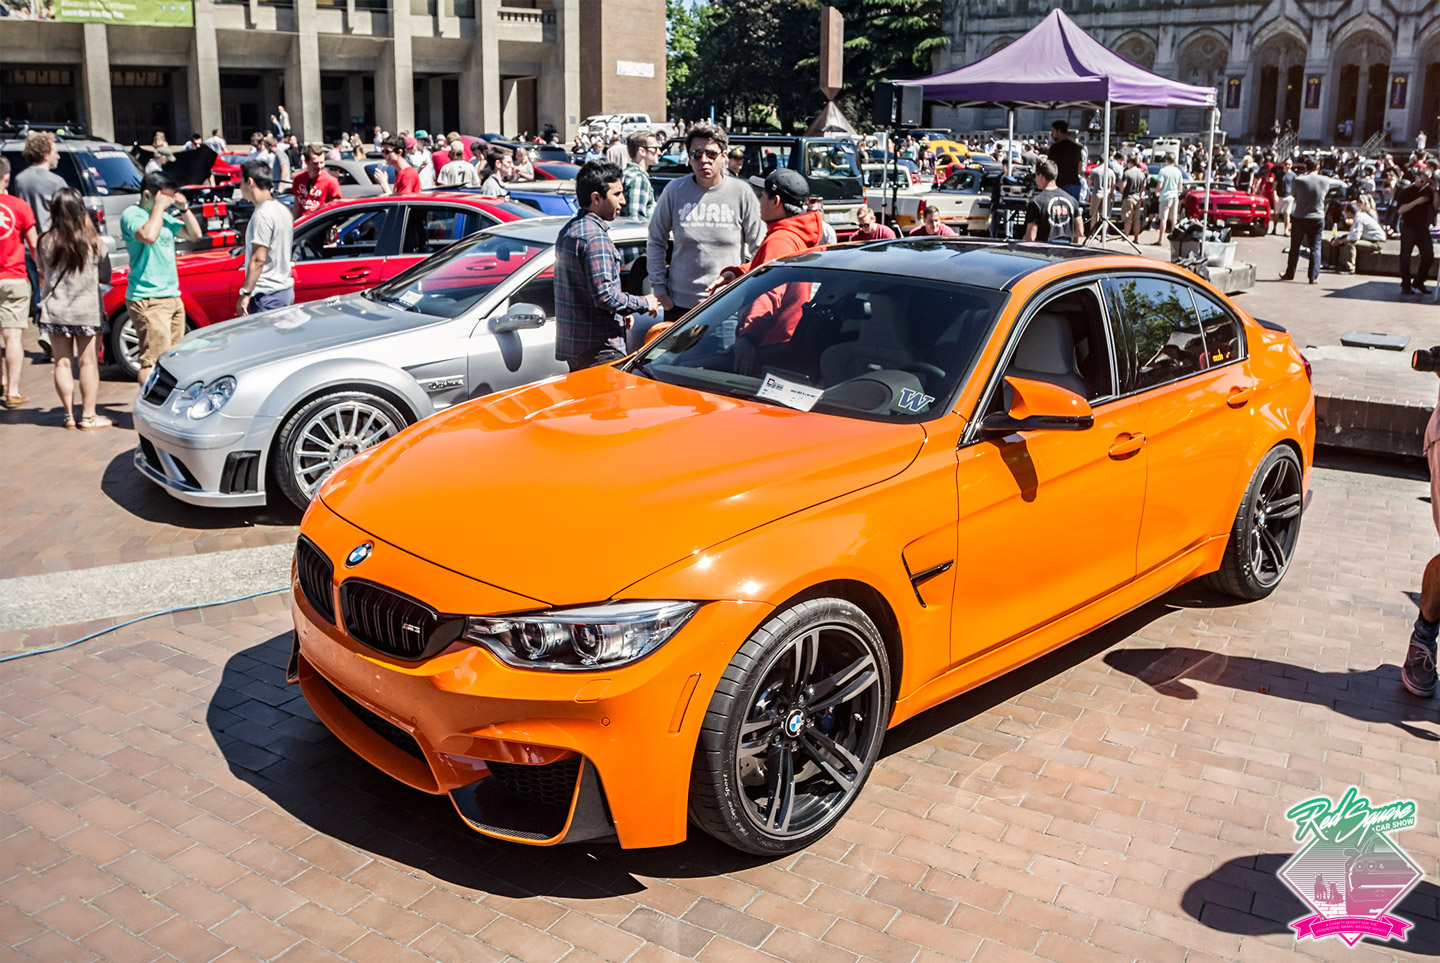 Red-Square-Car-Show-9-UW-Charity-Benefit-PAWS-org-Orange-BMW-s